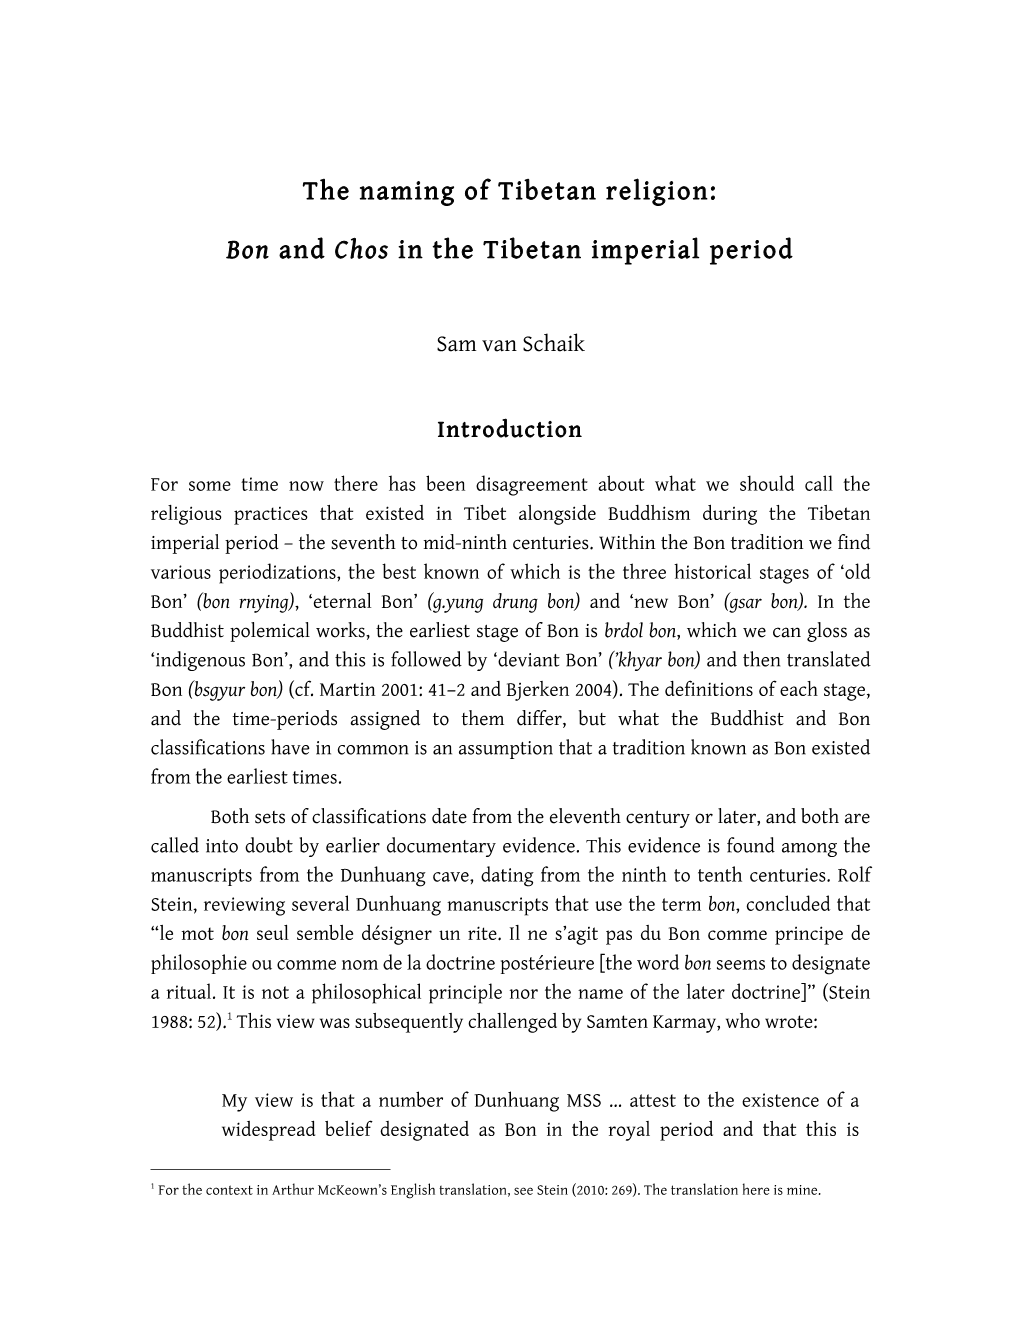 The Naming of Tibetan Religion: Bon and Chos in the Tibetan Imperial